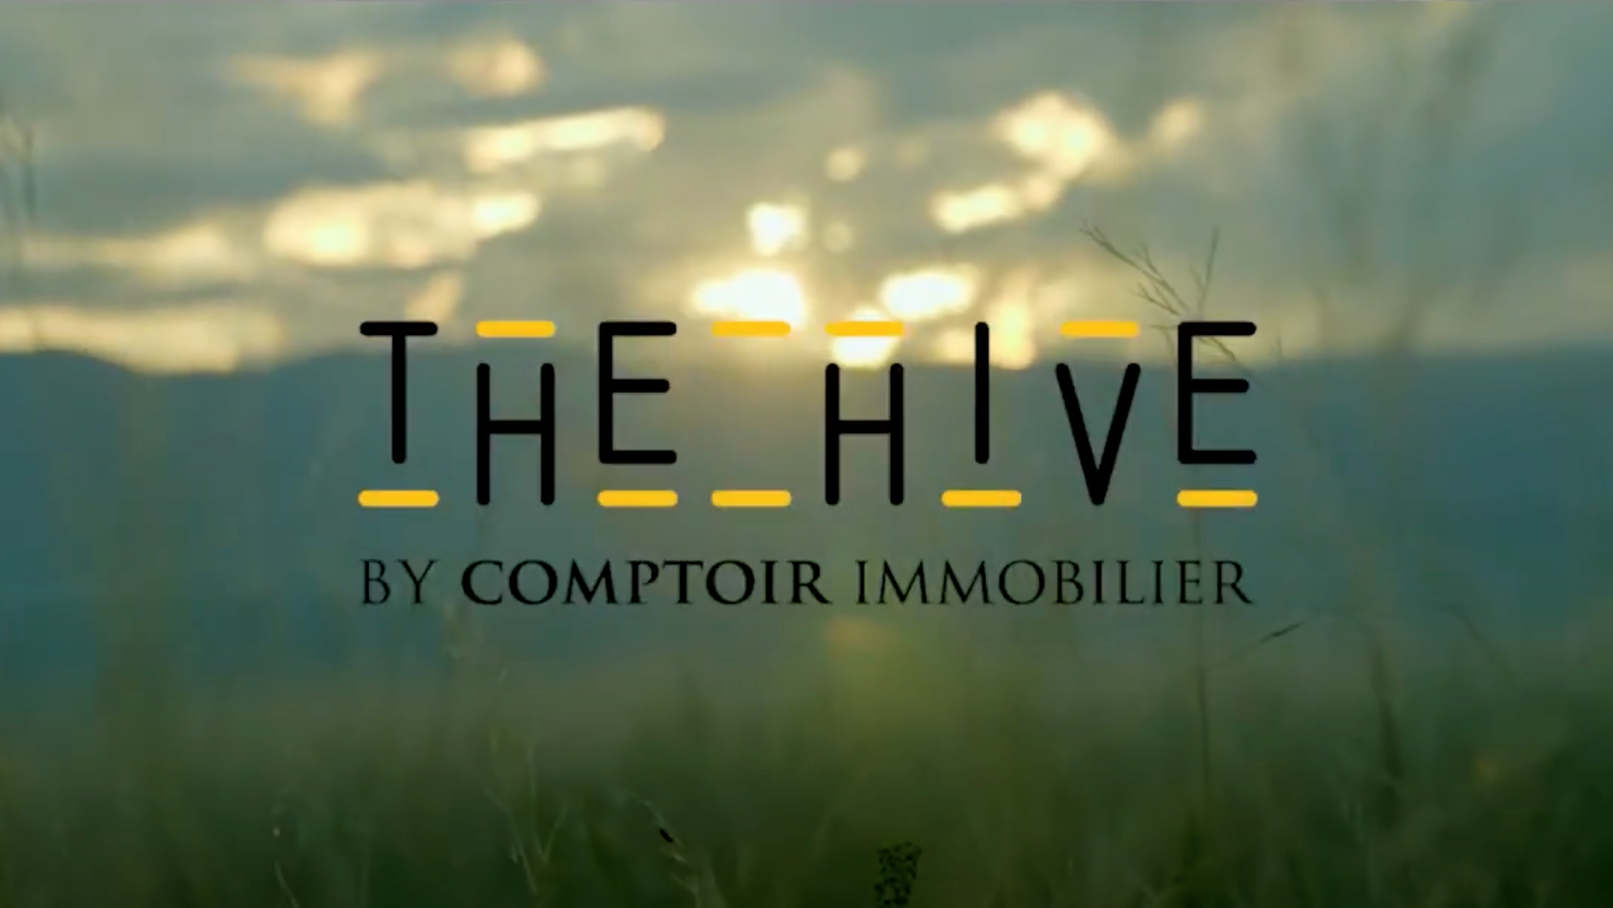 Thehivebycomptoirimmobilier